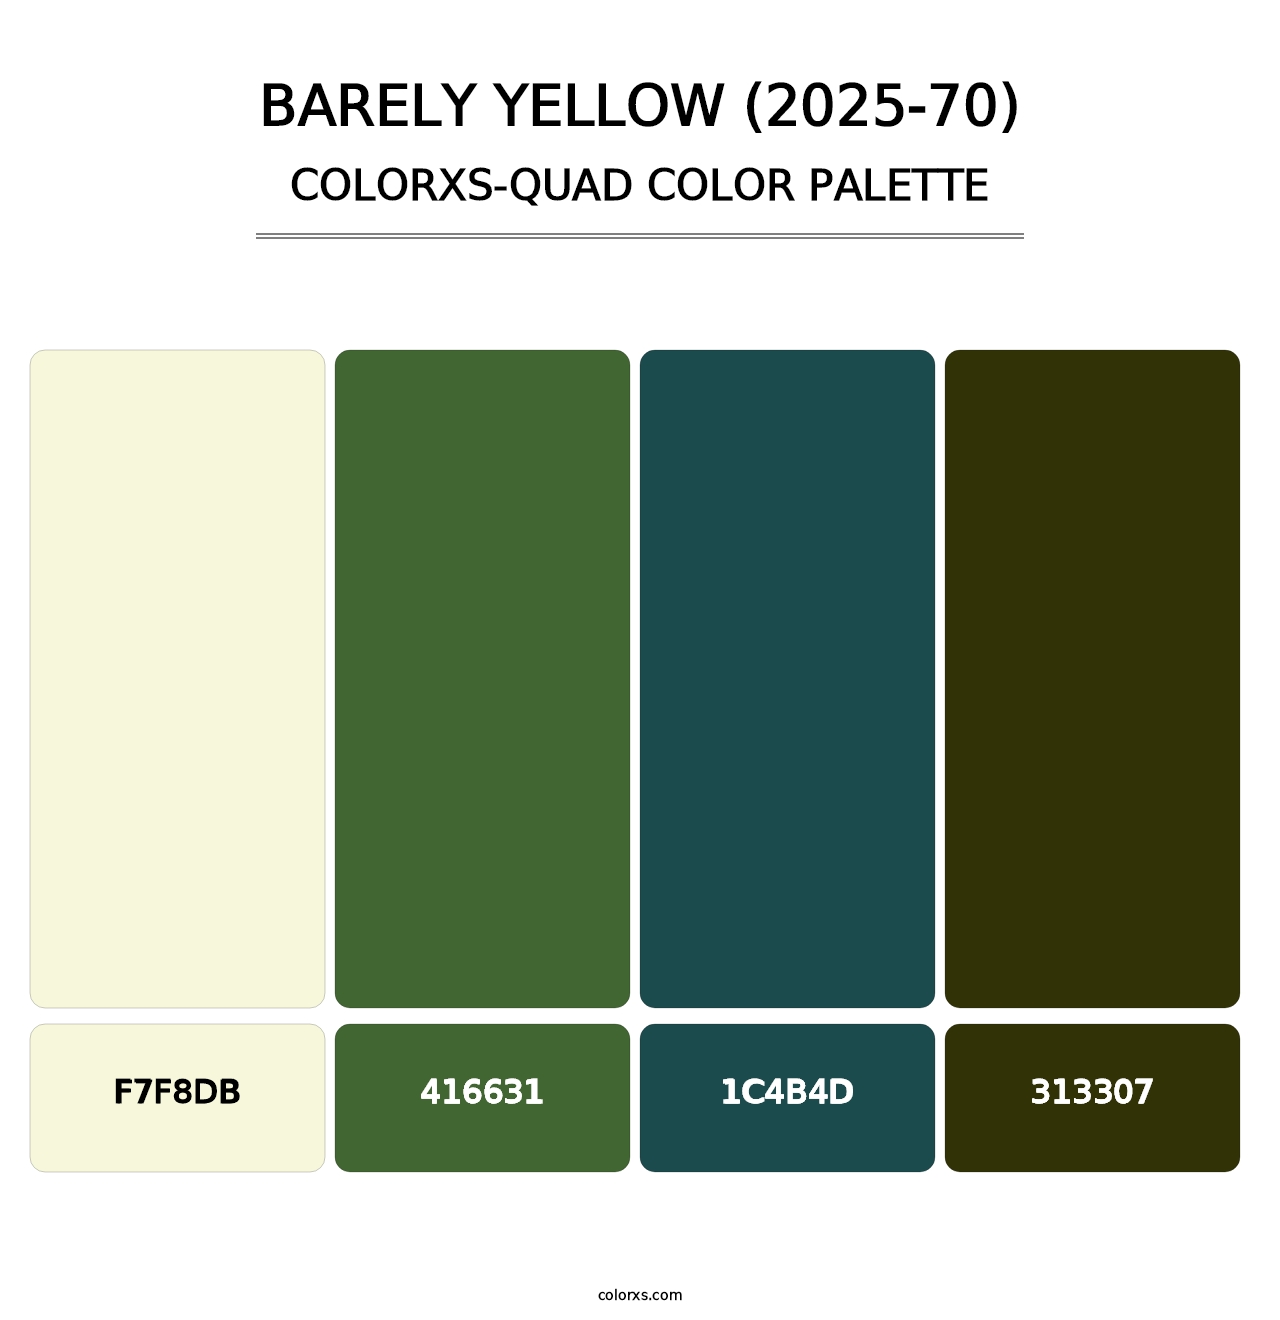 Barely Yellow (2025-70) - Colorxs Quad Palette